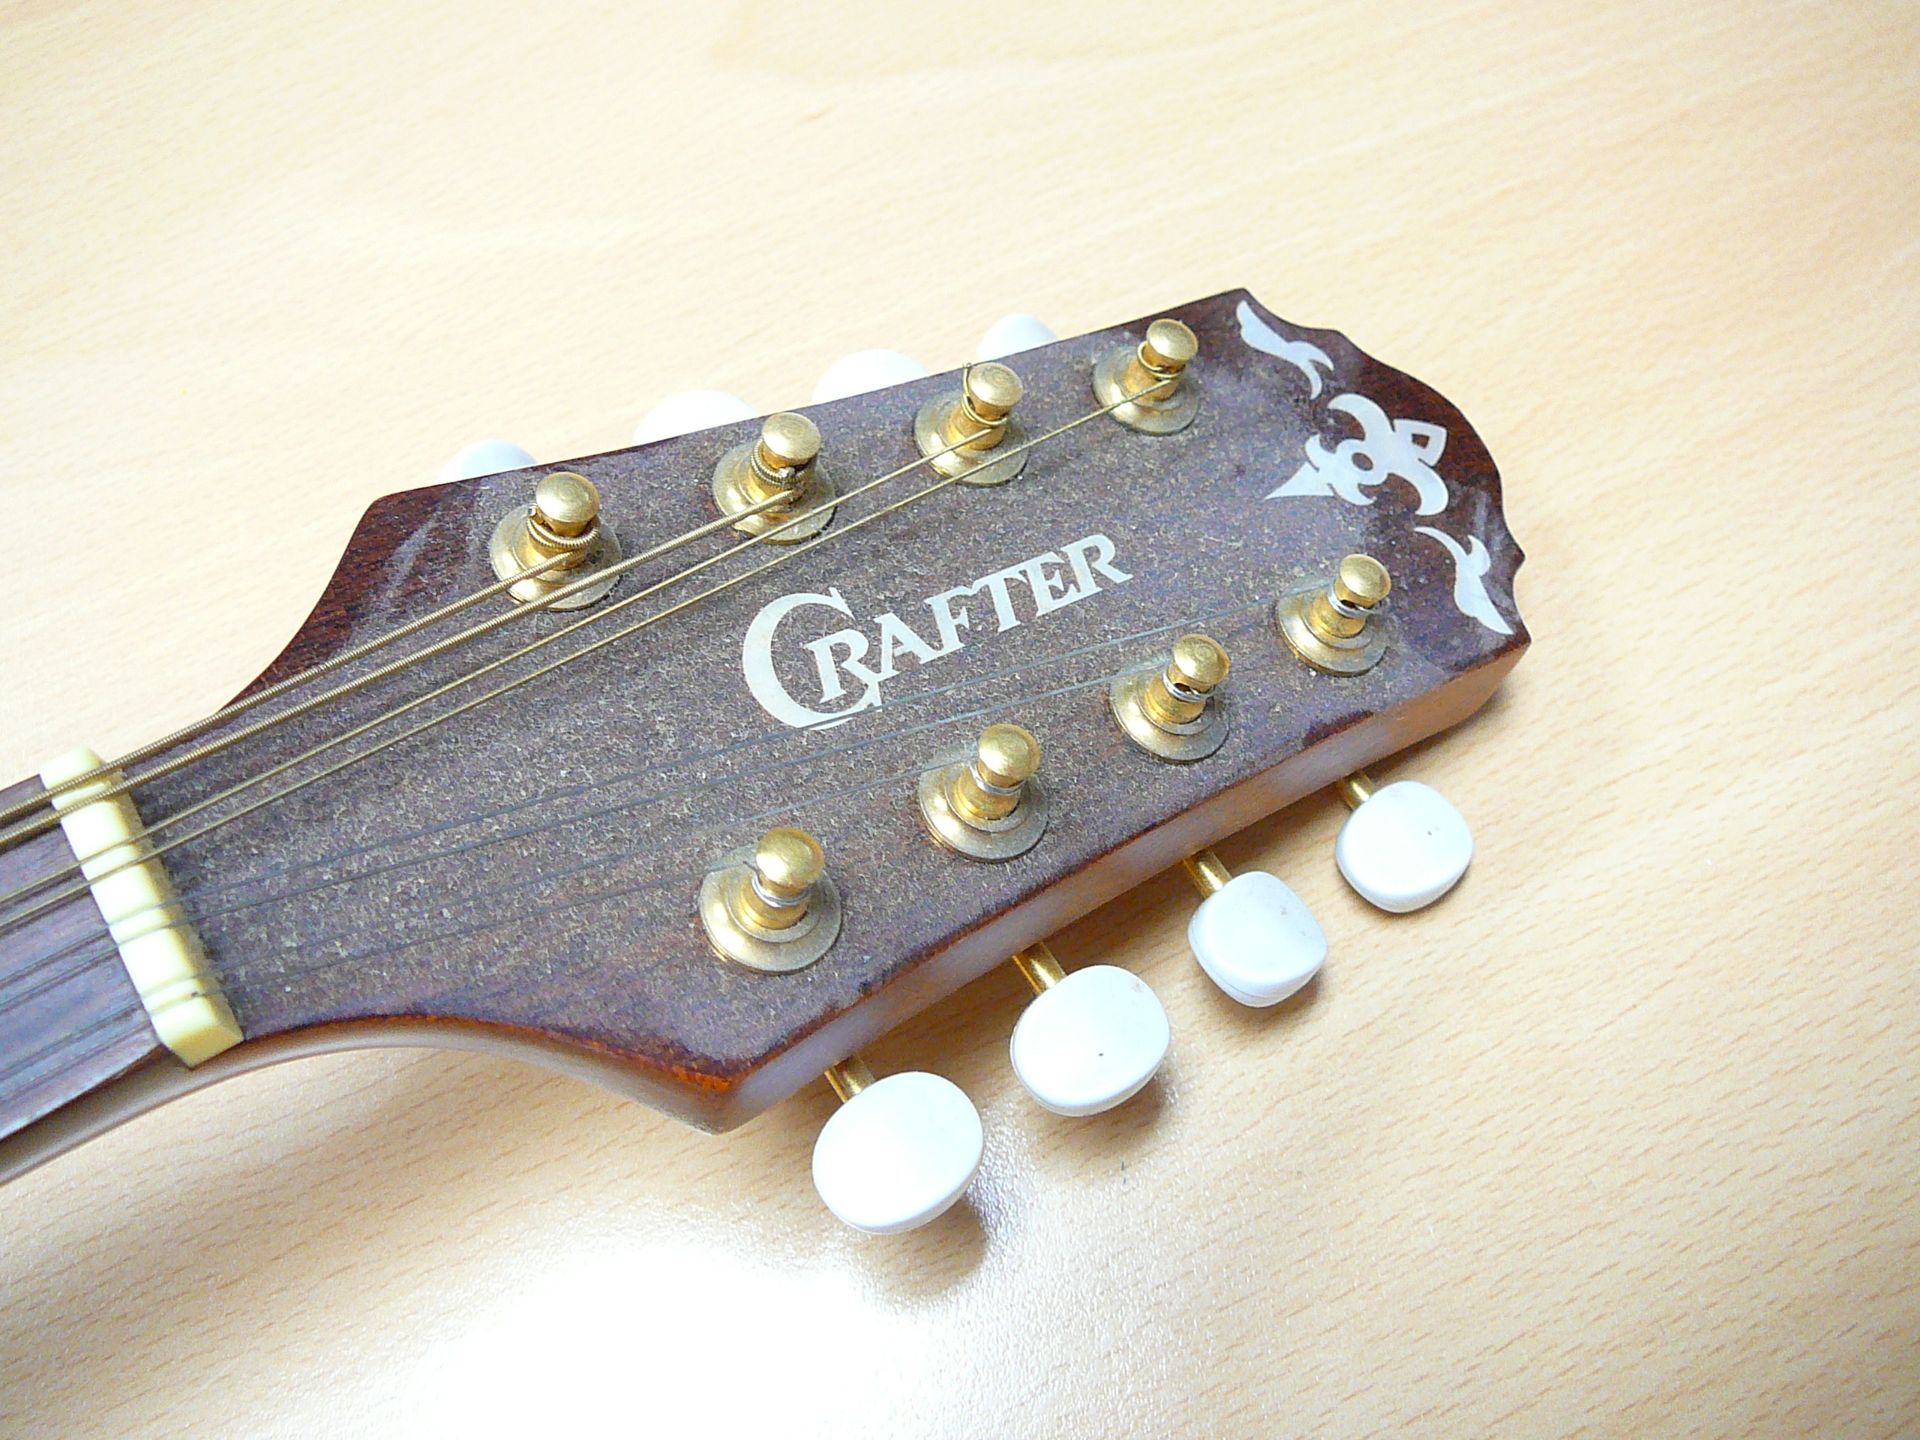 Crafter electro acoustic mandolin - Image 4 of 5